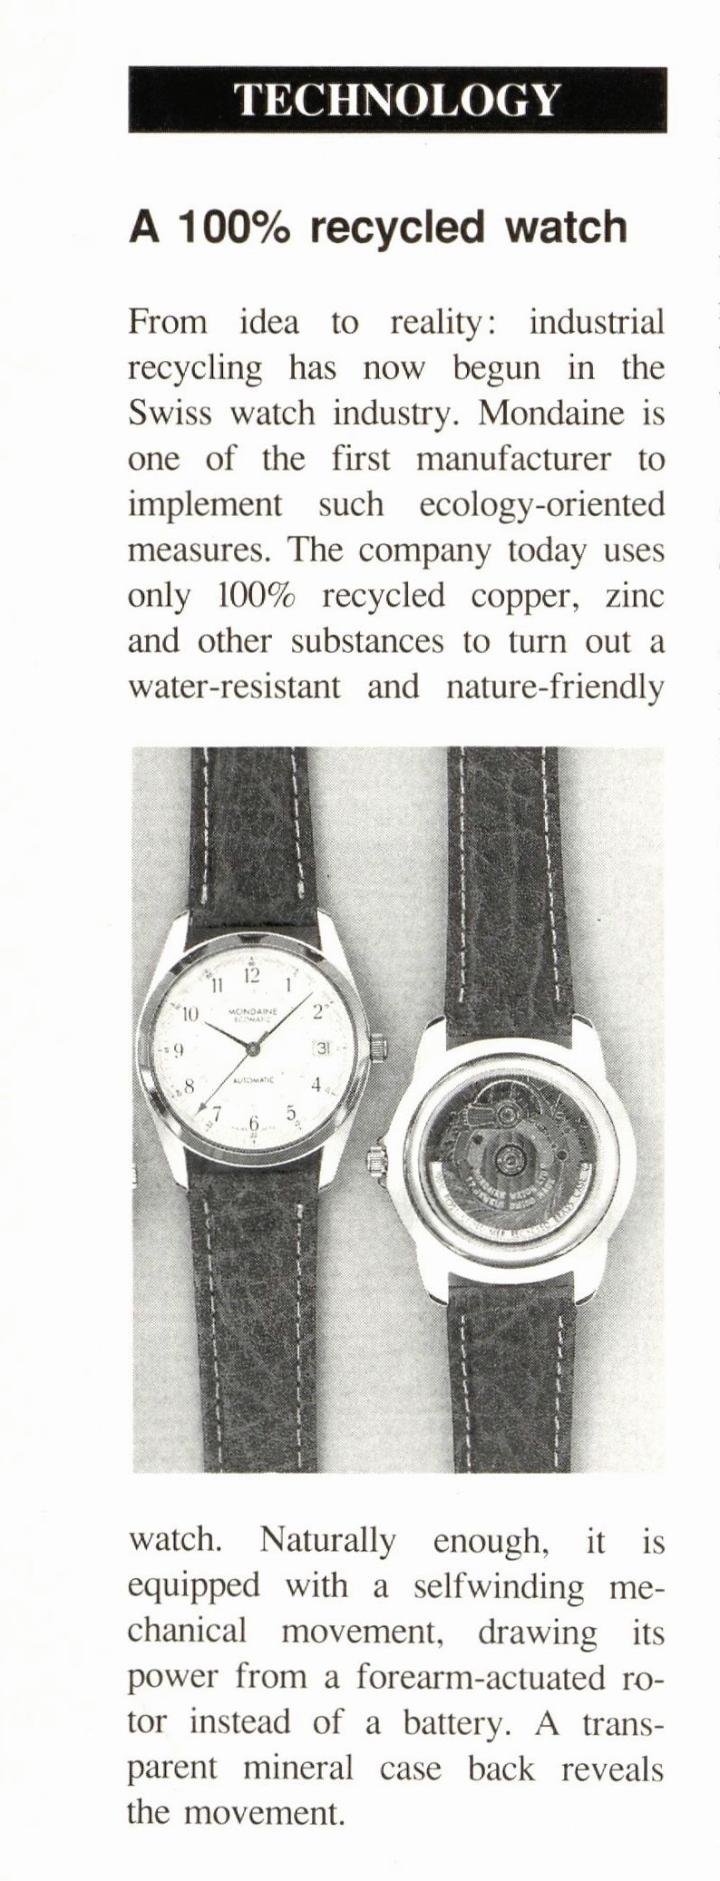 An article from 1992 in Europa Star on Mondaine's recycled watch, at a time when the issue was not a widespread concern.